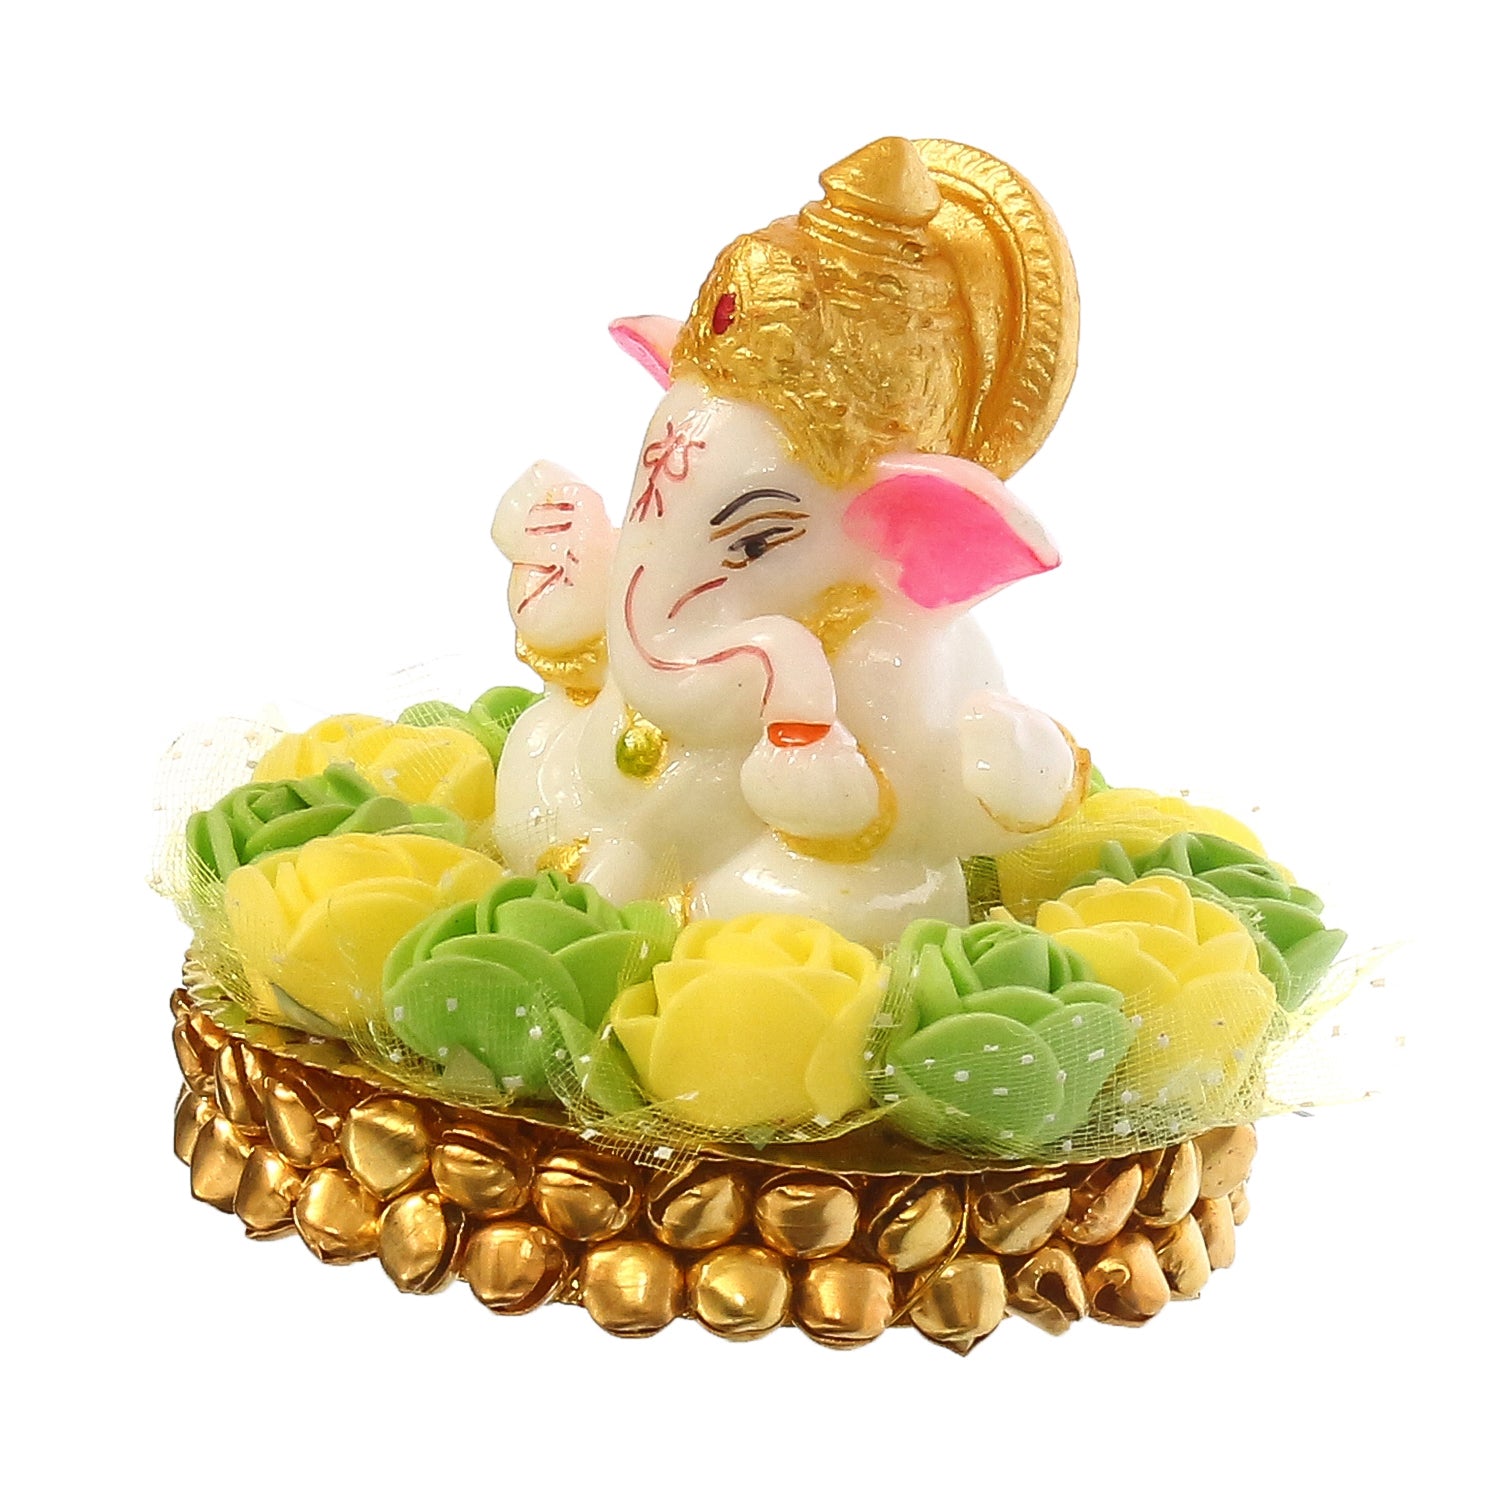 Lord Ganesha Idol On Decorative Handcrafted Green And Yellow Flowers Plate 5